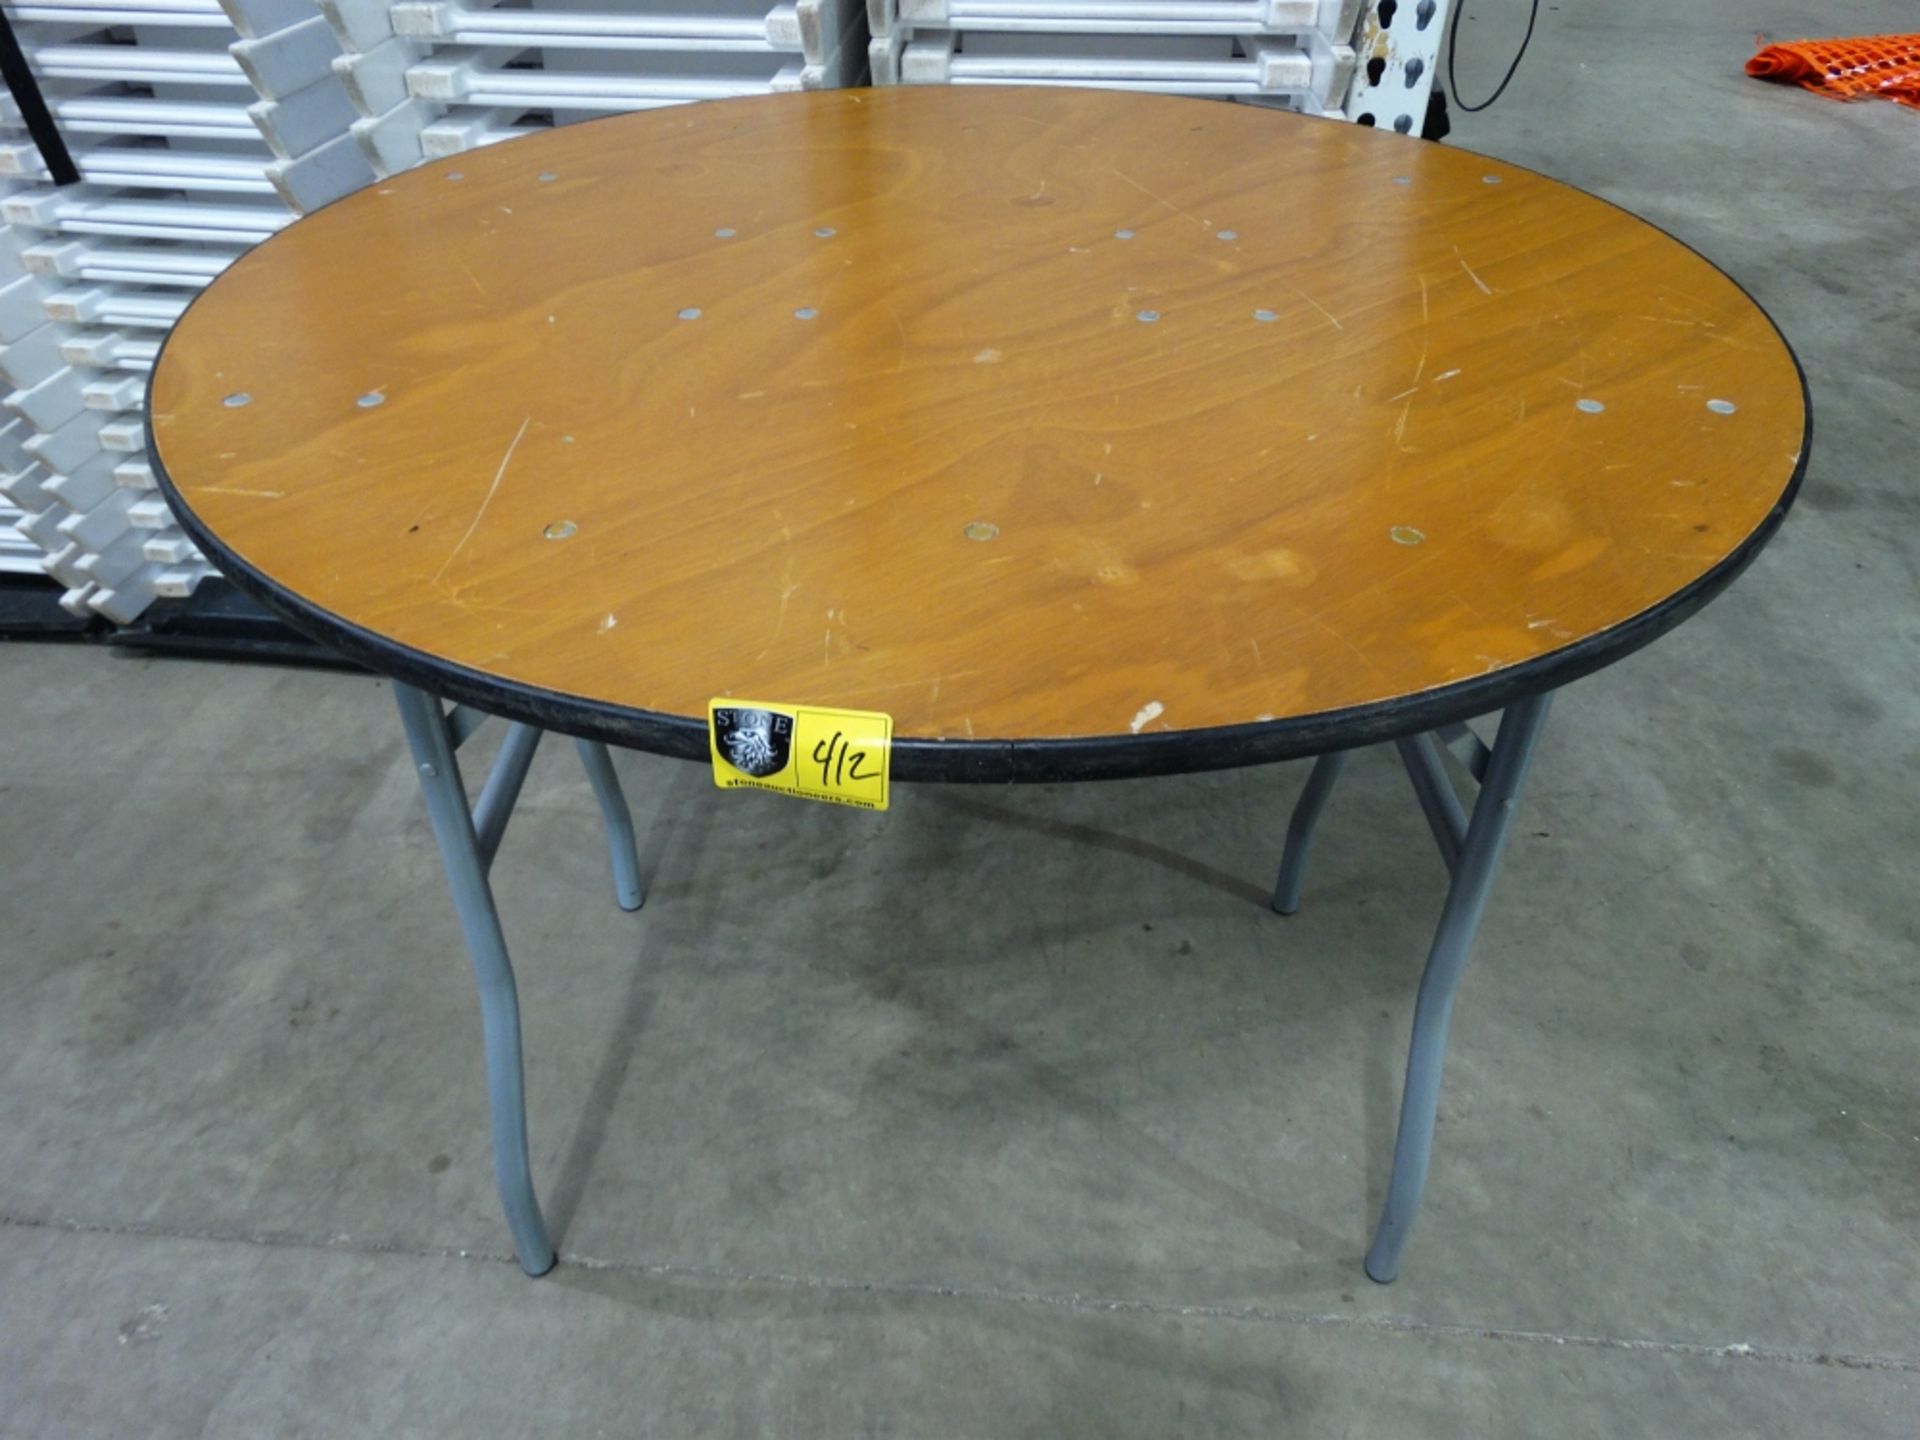 Table, 36" Round Plywood Top